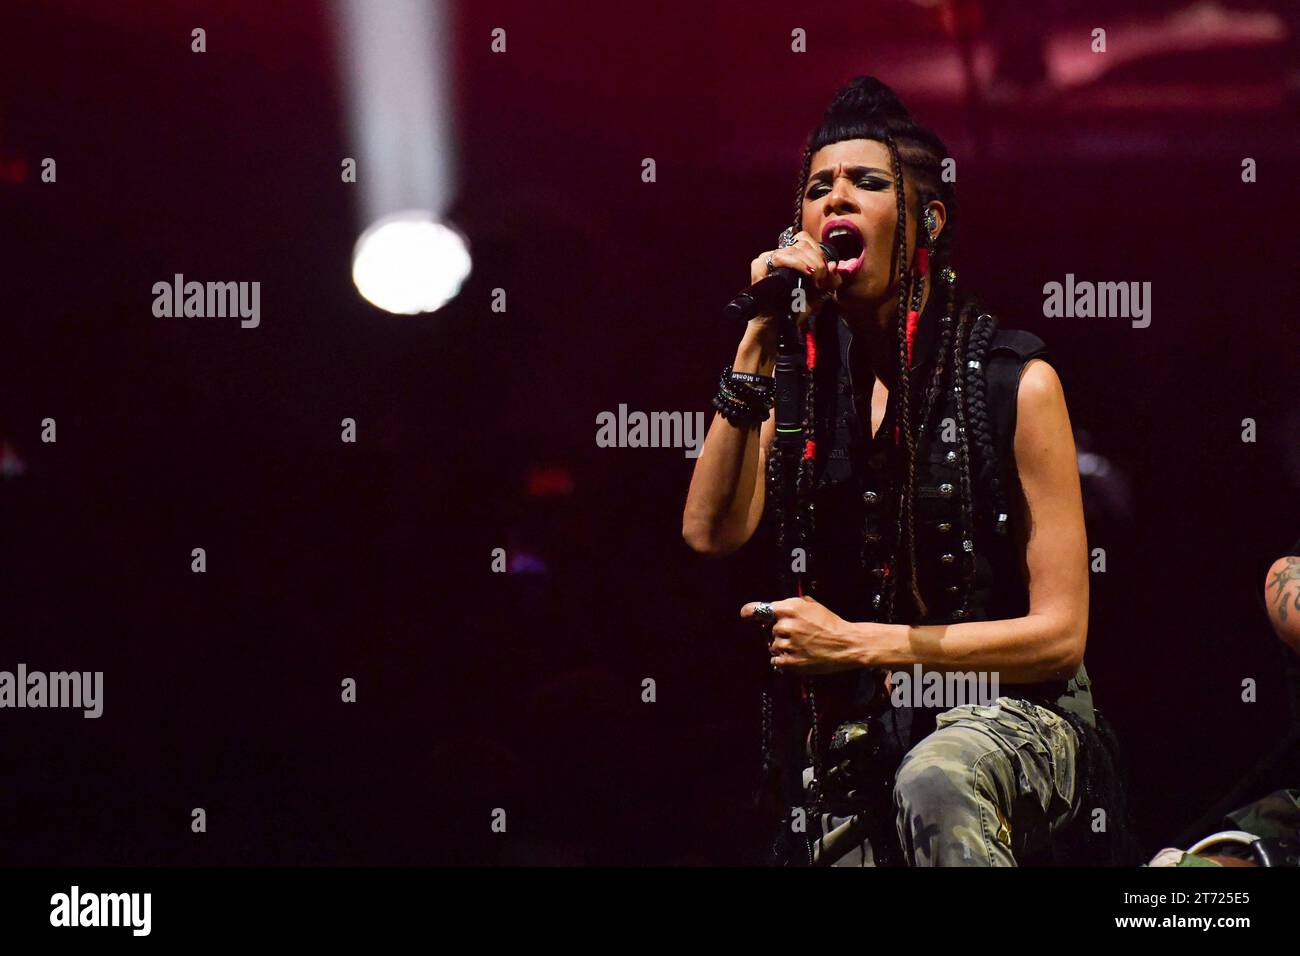 Rouen, France. 10th Nov, 2023. Shaka Ponk performs at the Zenith in Rouen,  France on november 10, 2023. Photo by Christophe Meng/ABACAPRESS.COM  Credit: Abaca Press/Alamy Live News Stock Photo - Alamy